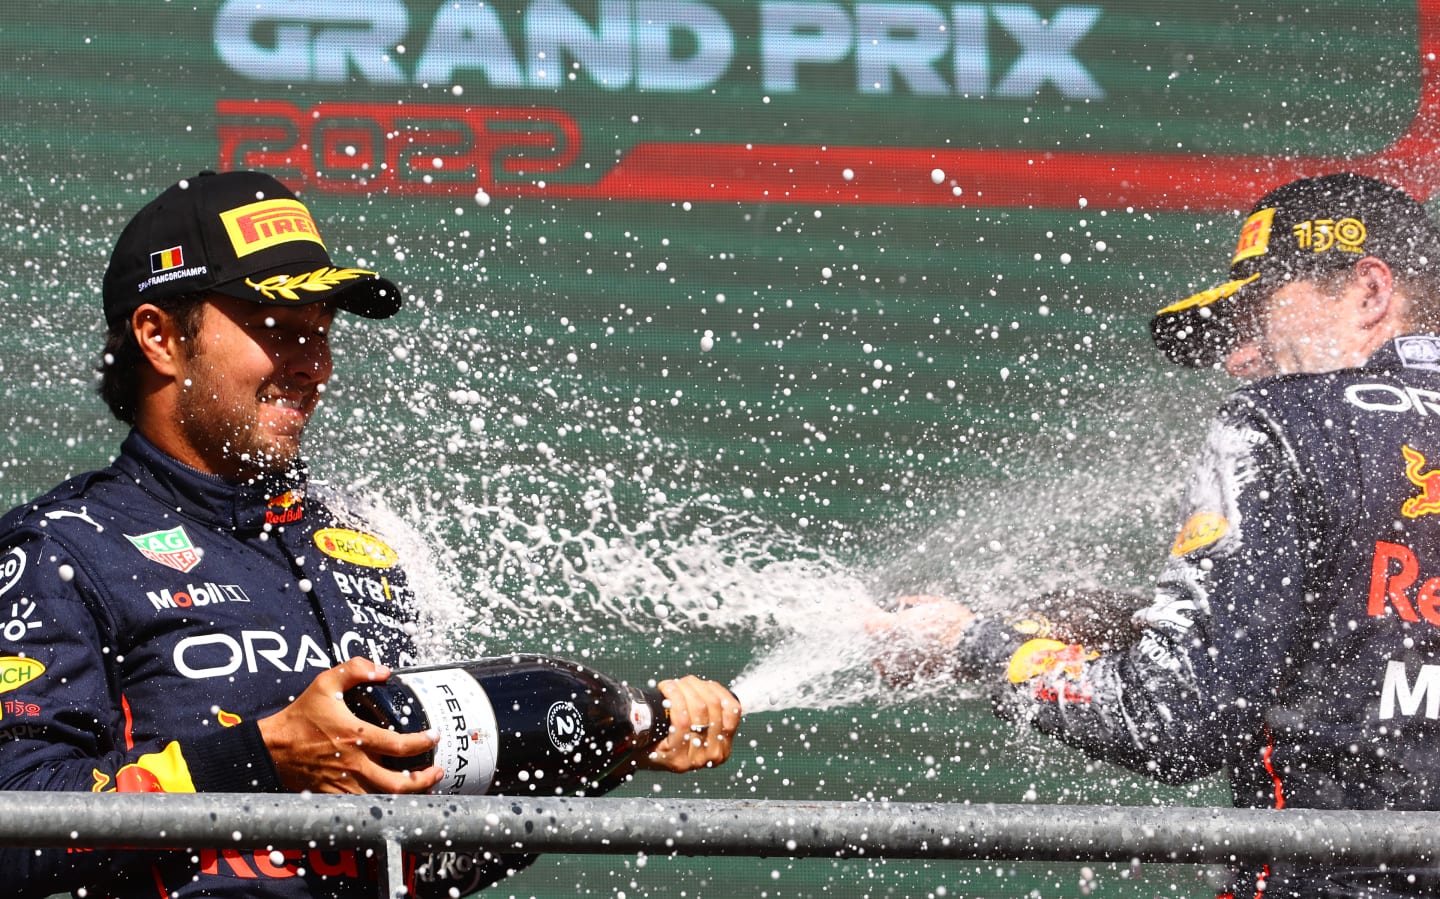 SPA, BELGIUM - AUGUST 28: Race winner Max Verstappen of the Netherlands and Oracle Red Bull Racing and Second placed Sergio Perez of Mexico and Oracle Red Bull Racing celebrate on the podium during the F1 Grand Prix of Belgium at Circuit de Spa-Francorchamps on August 28, 2022 in Spa, Belgium. (Photo by Mark Thompson/Getty Images)